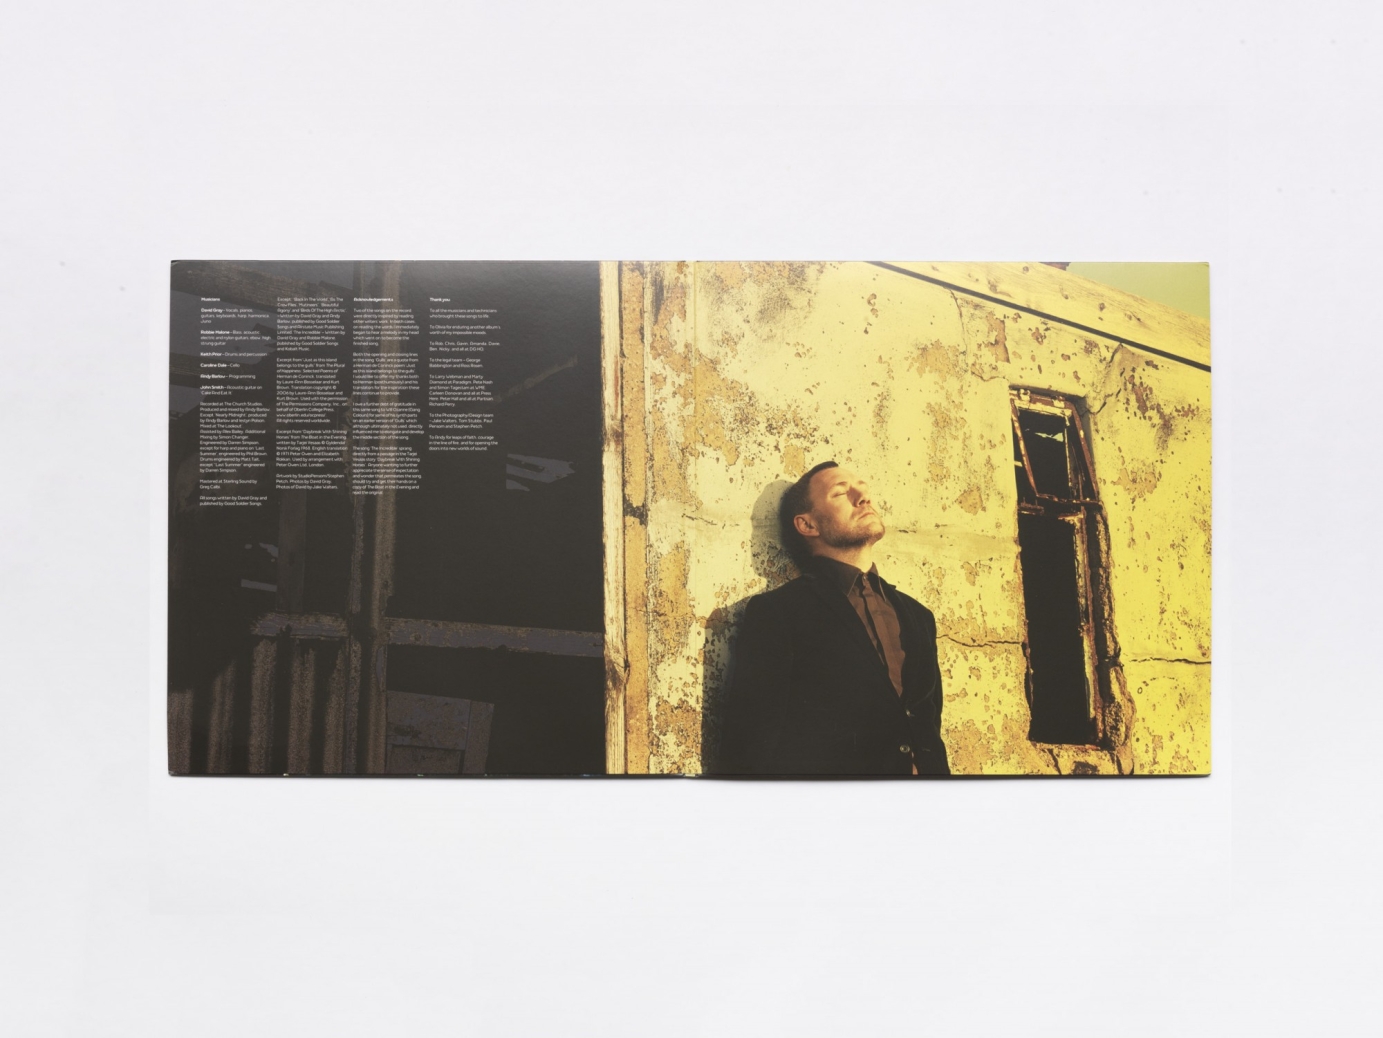 Creative direction and graphic design for David Gray by StudioPensom